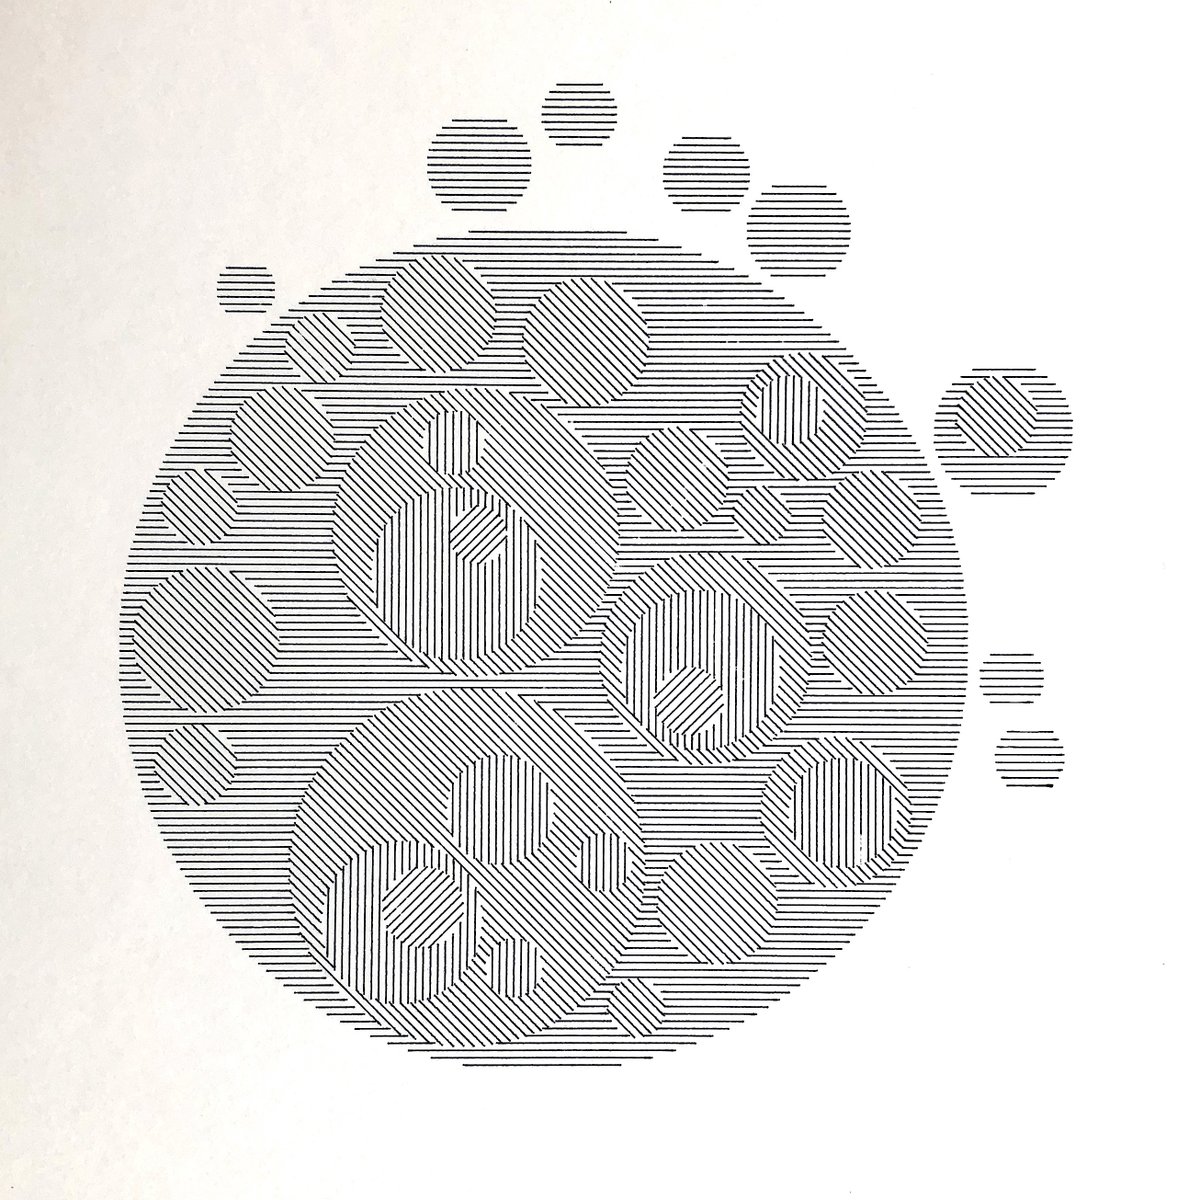 Day 11 of  #inkotober on the plotter!Two takes on some circle fills.All gcode and  @openframeworks source code available here:  https://github.com/andymasteroffish/inktober_2020 #inktober2020 #inktober2020day11  #axidraw #creativecoding